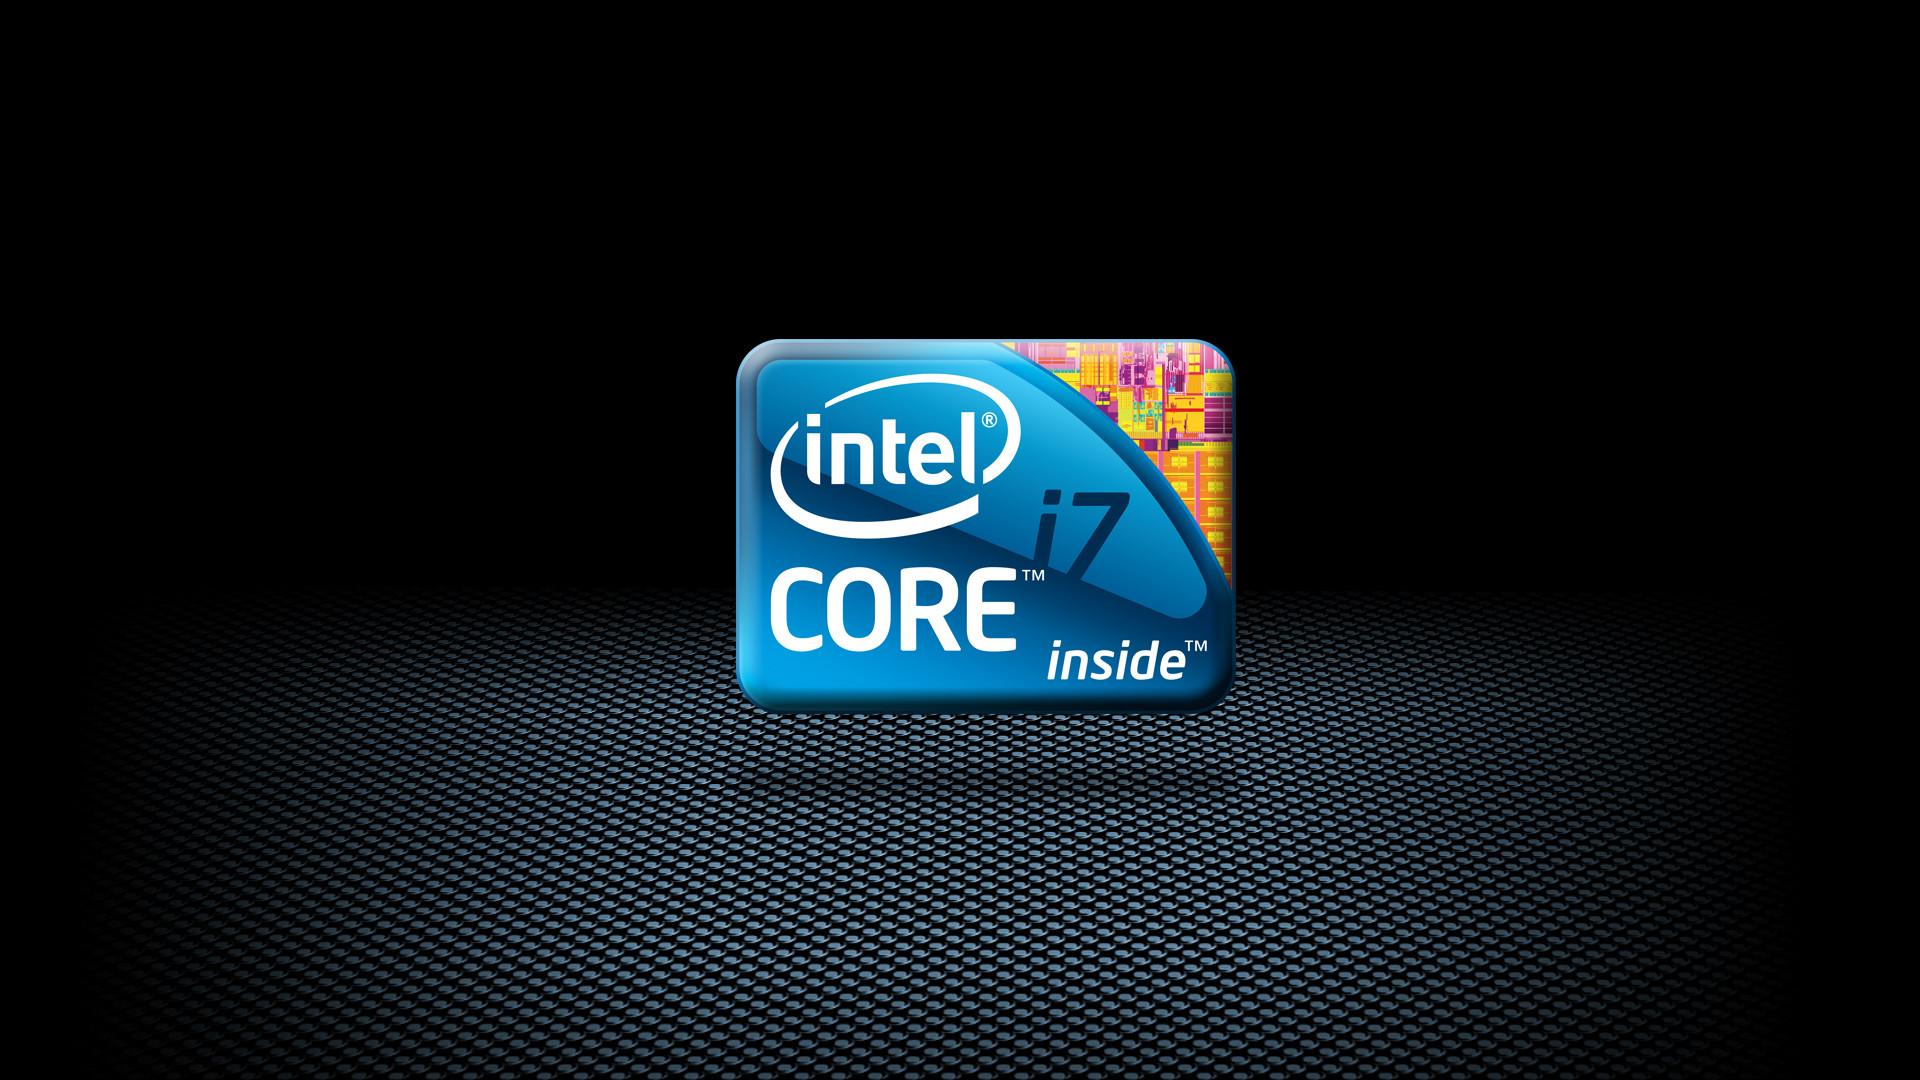 1920x1080 wallpaper.wiki-Intel-Backgrounds-Free-Download-PIC-WPB001102